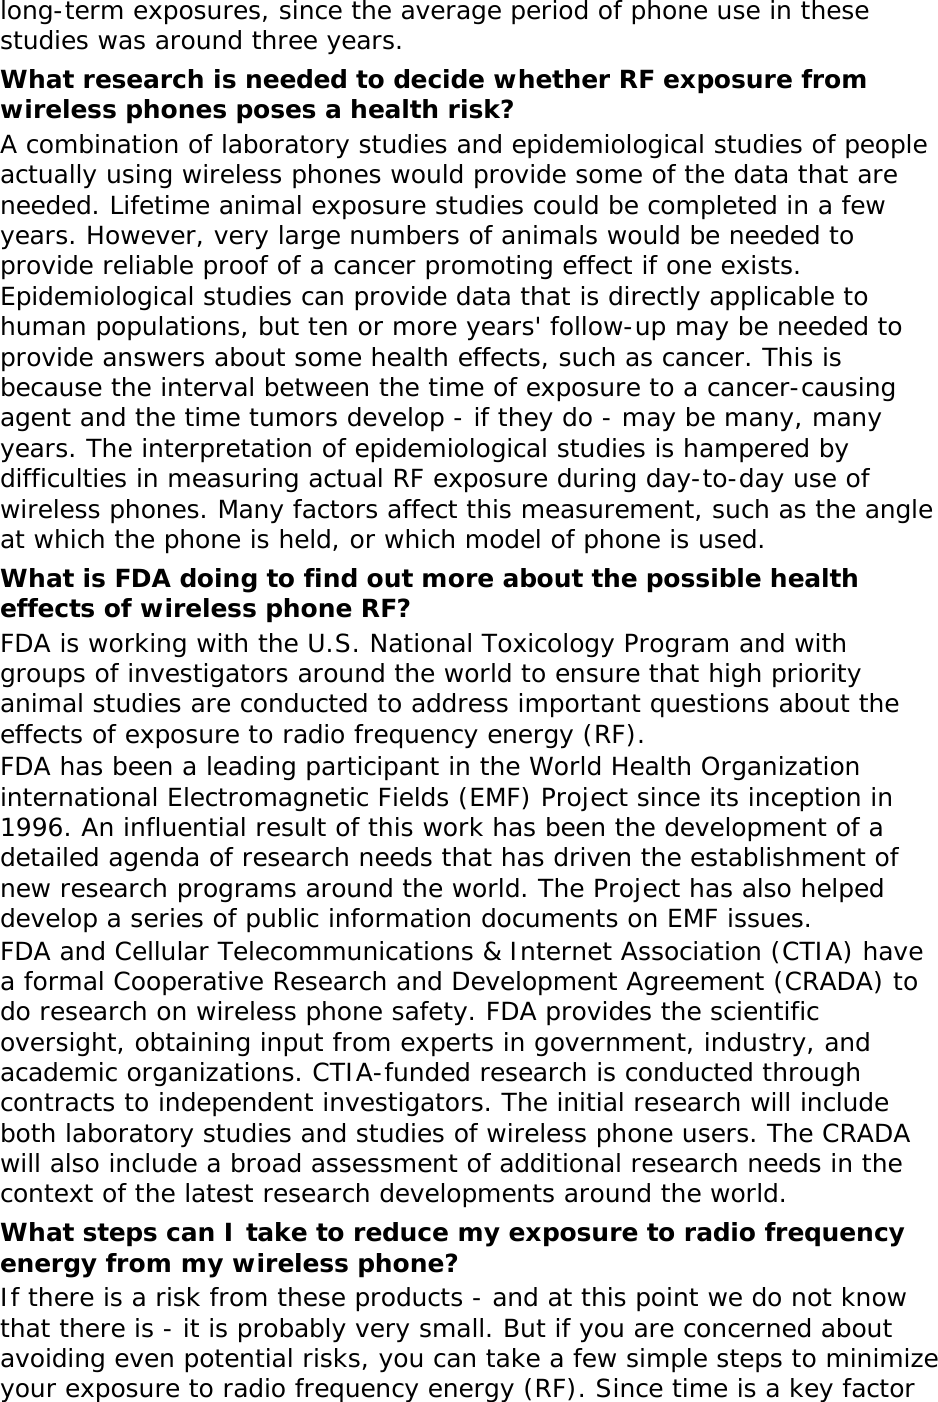 long-term exposures, since the average period of phone use in these studies was around three years. What research is needed to decide whether RF exposure from wireless phones poses a health risk? A combination of laboratory studies and epidemiological studies of people actually using wireless phones would provide some of the data that are needed. Lifetime animal exposure studies could be completed in a few years. However, very large numbers of animals would be needed to provide reliable proof of a cancer promoting effect if one exists. Epidemiological studies can provide data that is directly applicable to human populations, but ten or more years&apos; follow-up may be needed to provide answers about some health effects, such as cancer. This is because the interval between the time of exposure to a cancer-causing agent and the time tumors develop - if they do - may be many, many years. The interpretation of epidemiological studies is hampered by difficulties in measuring actual RF exposure during day-to-day use of wireless phones. Many factors affect this measurement, such as the angle at which the phone is held, or which model of phone is used. What is FDA doing to find out more about the possible health effects of wireless phone RF? FDA is working with the U.S. National Toxicology Program and with groups of investigators around the world to ensure that high priority animal studies are conducted to address important questions about the effects of exposure to radio frequency energy (RF). FDA has been a leading participant in the World Health Organization international Electromagnetic Fields (EMF) Project since its inception in 1996. An influential result of this work has been the development of a detailed agenda of research needs that has driven the establishment of new research programs around the world. The Project has also helped develop a series of public information documents on EMF issues. FDA and Cellular Telecommunications &amp; Internet Association (CTIA) have a formal Cooperative Research and Development Agreement (CRADA) to do research on wireless phone safety. FDA provides the scientific oversight, obtaining input from experts in government, industry, and academic organizations. CTIA-funded research is conducted through contracts to independent investigators. The initial research will include both laboratory studies and studies of wireless phone users. The CRADA will also include a broad assessment of additional research needs in the context of the latest research developments around the world. What steps can I take to reduce my exposure to radio frequency energy from my wireless phone? If there is a risk from these products - and at this point we do not know that there is - it is probably very small. But if you are concerned about avoiding even potential risks, you can take a few simple steps to minimize your exposure to radio frequency energy (RF). Since time is a key factor 